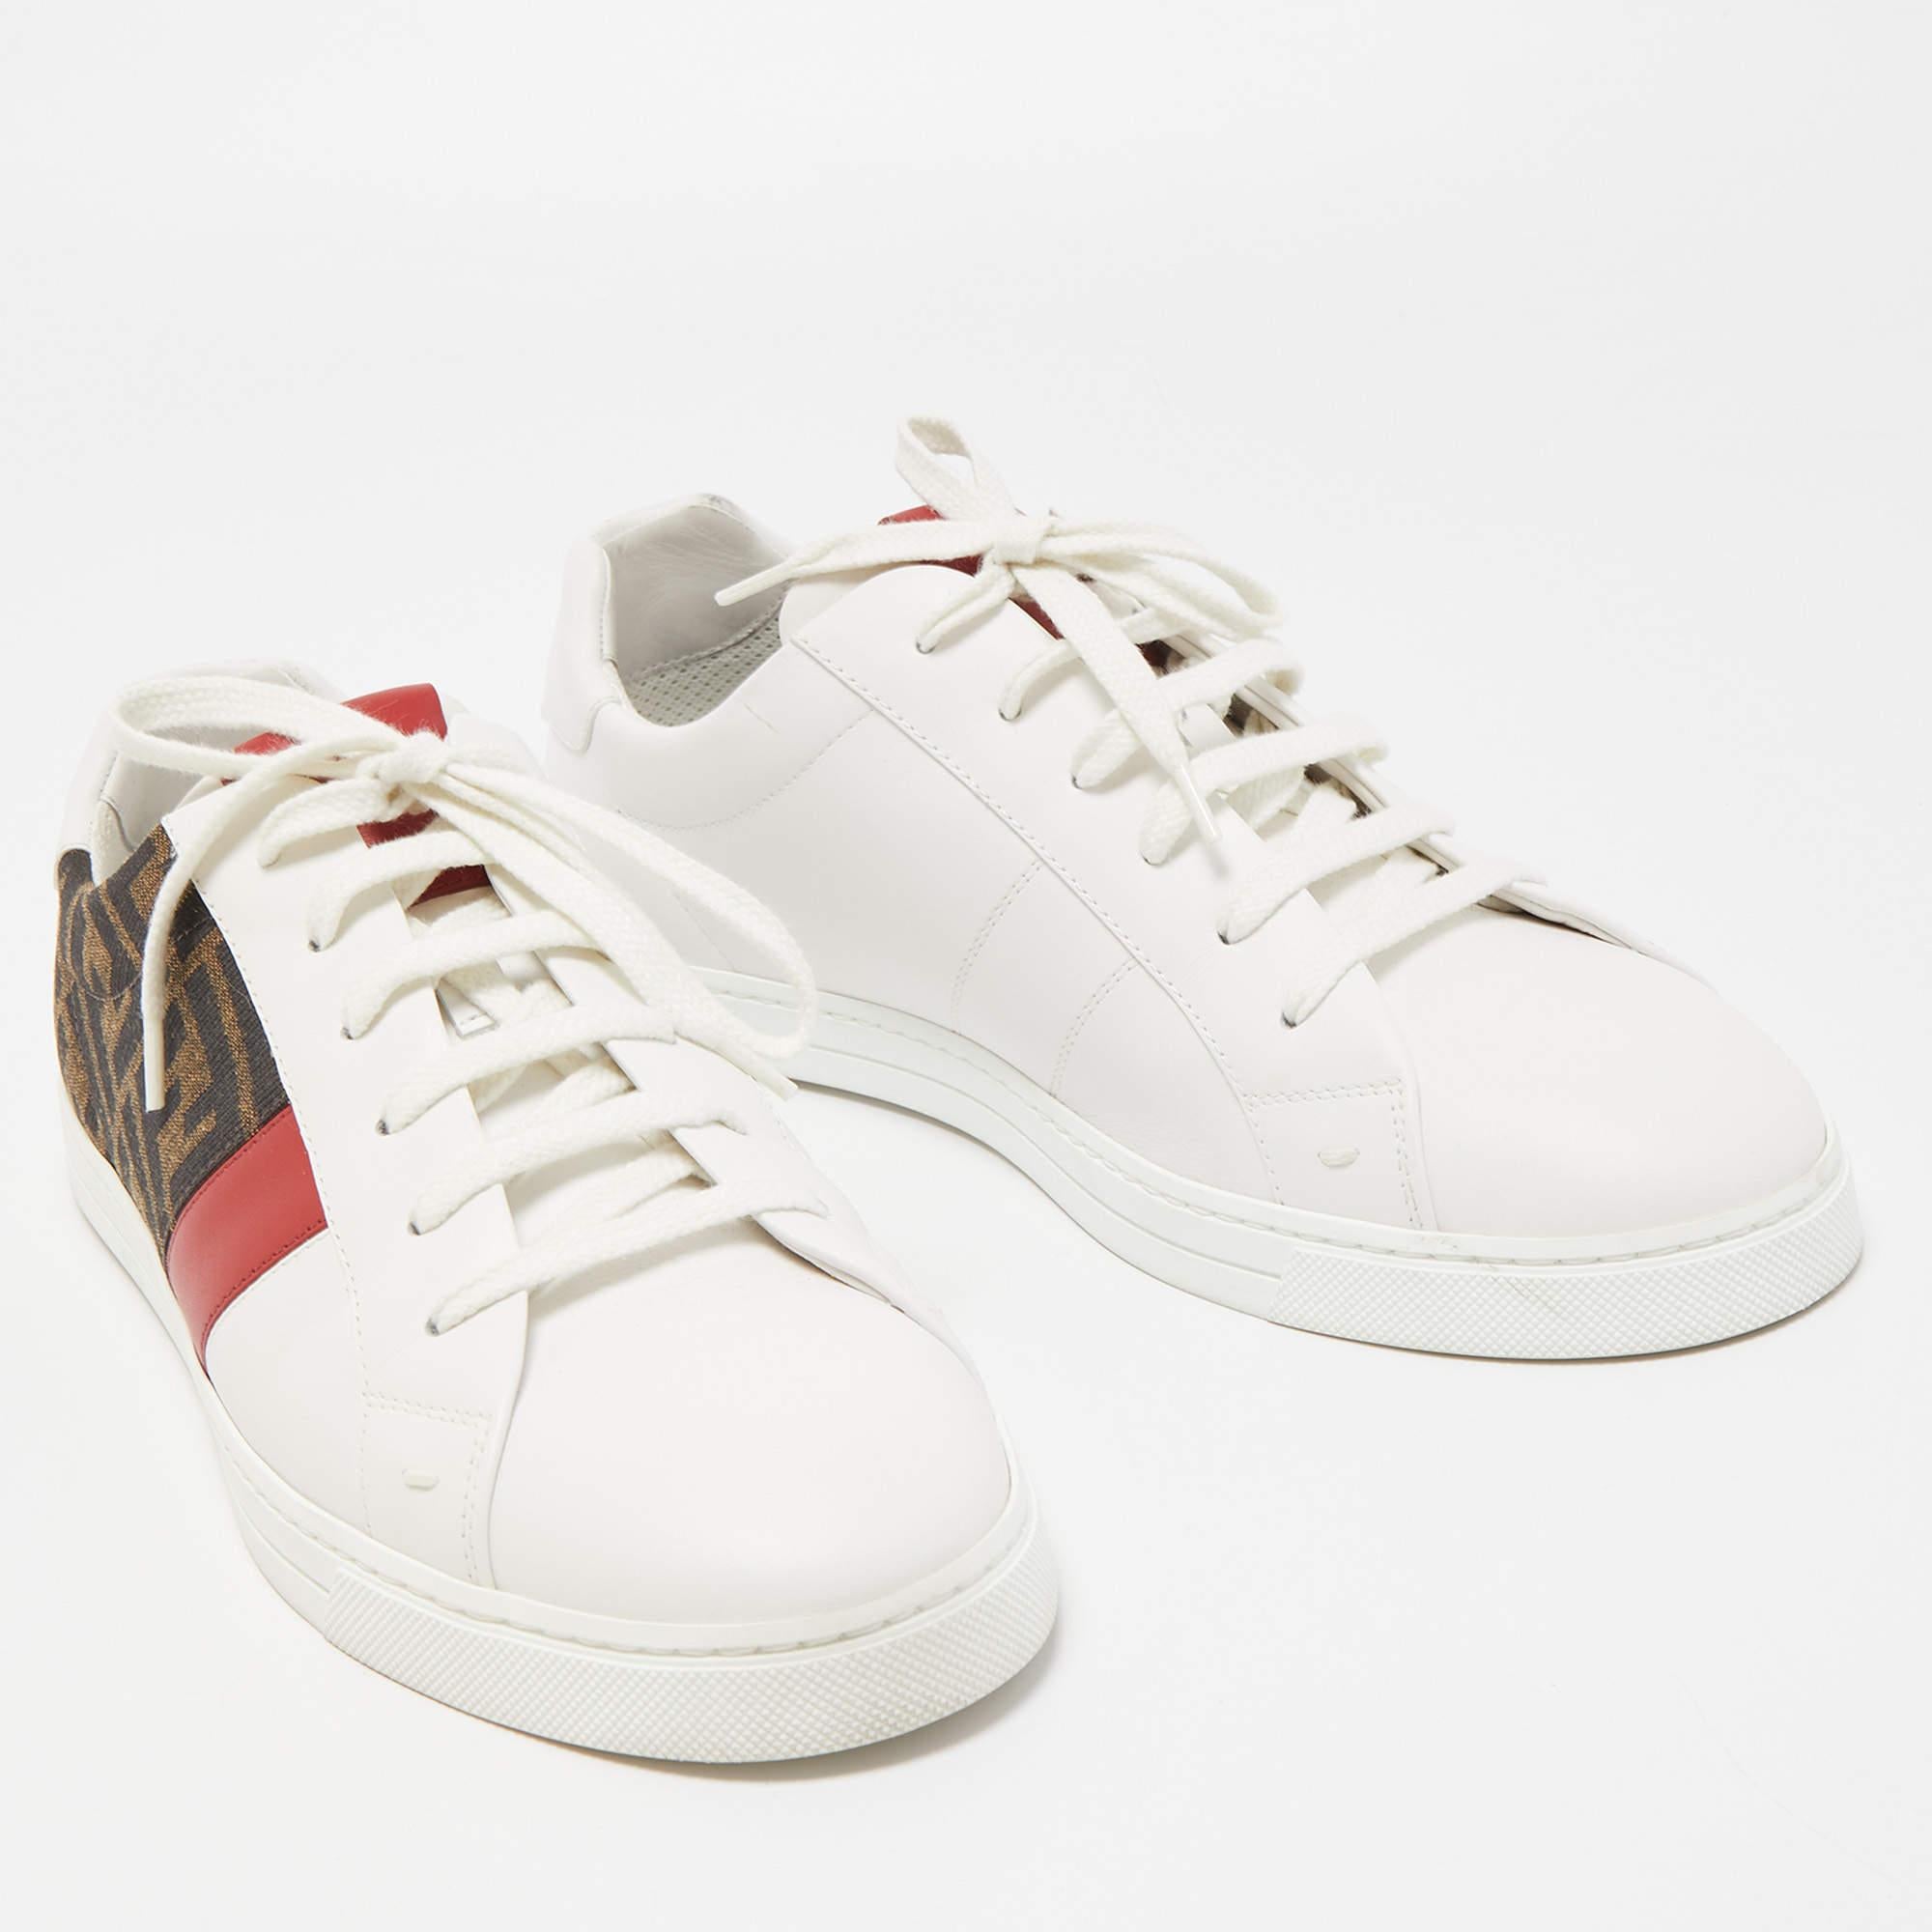 Men's Fendi Tricolour Leather and FF Canvas Low Top Sneakers Size 42